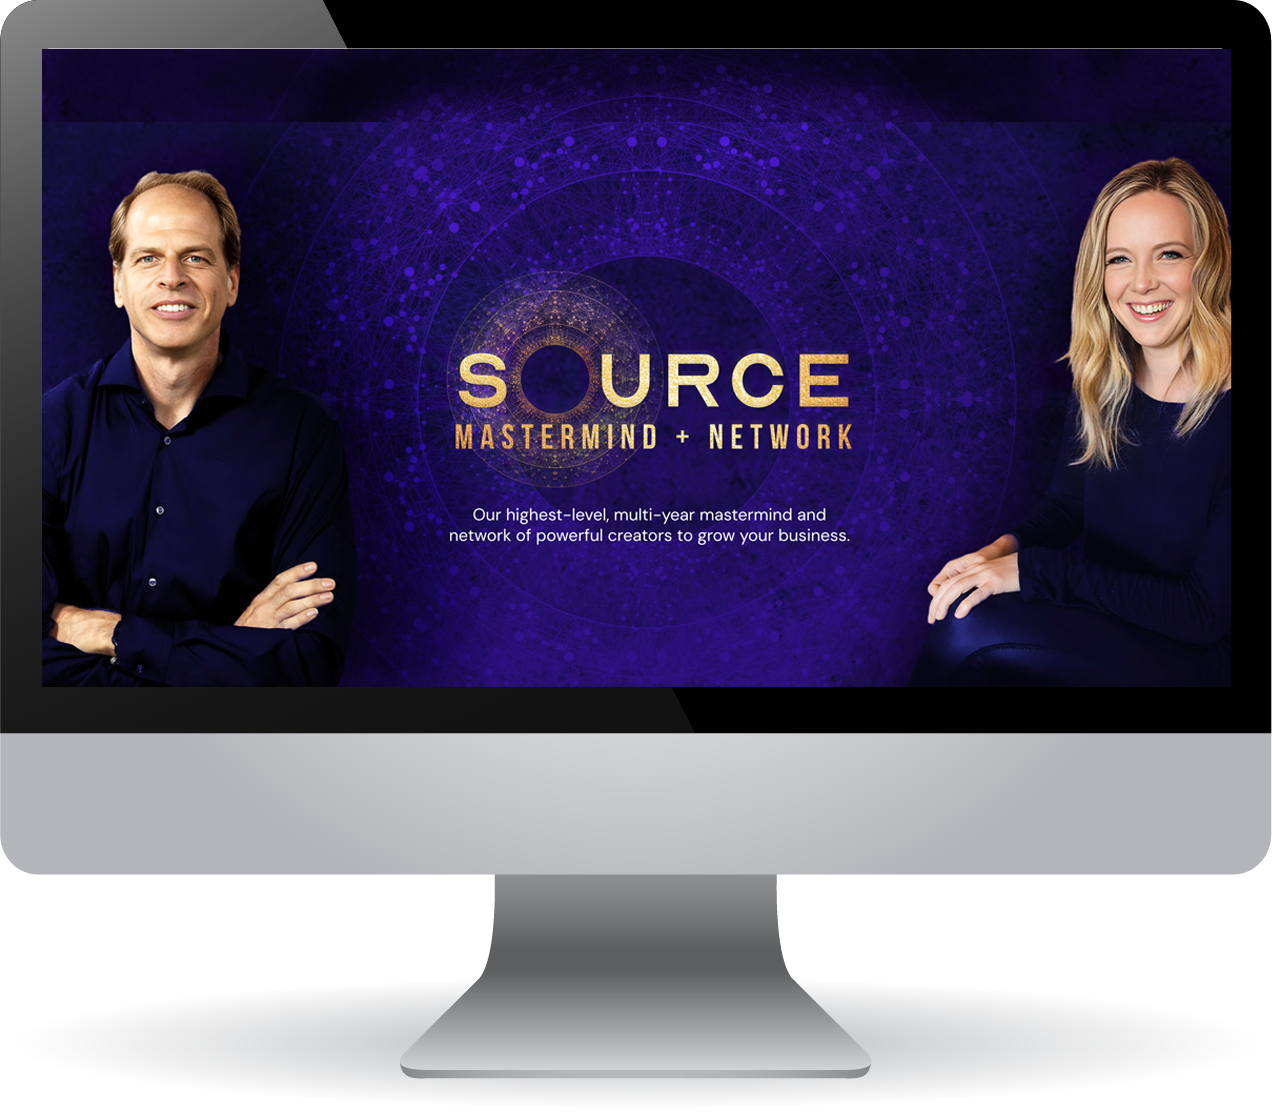 The Source Mastermind + Networking